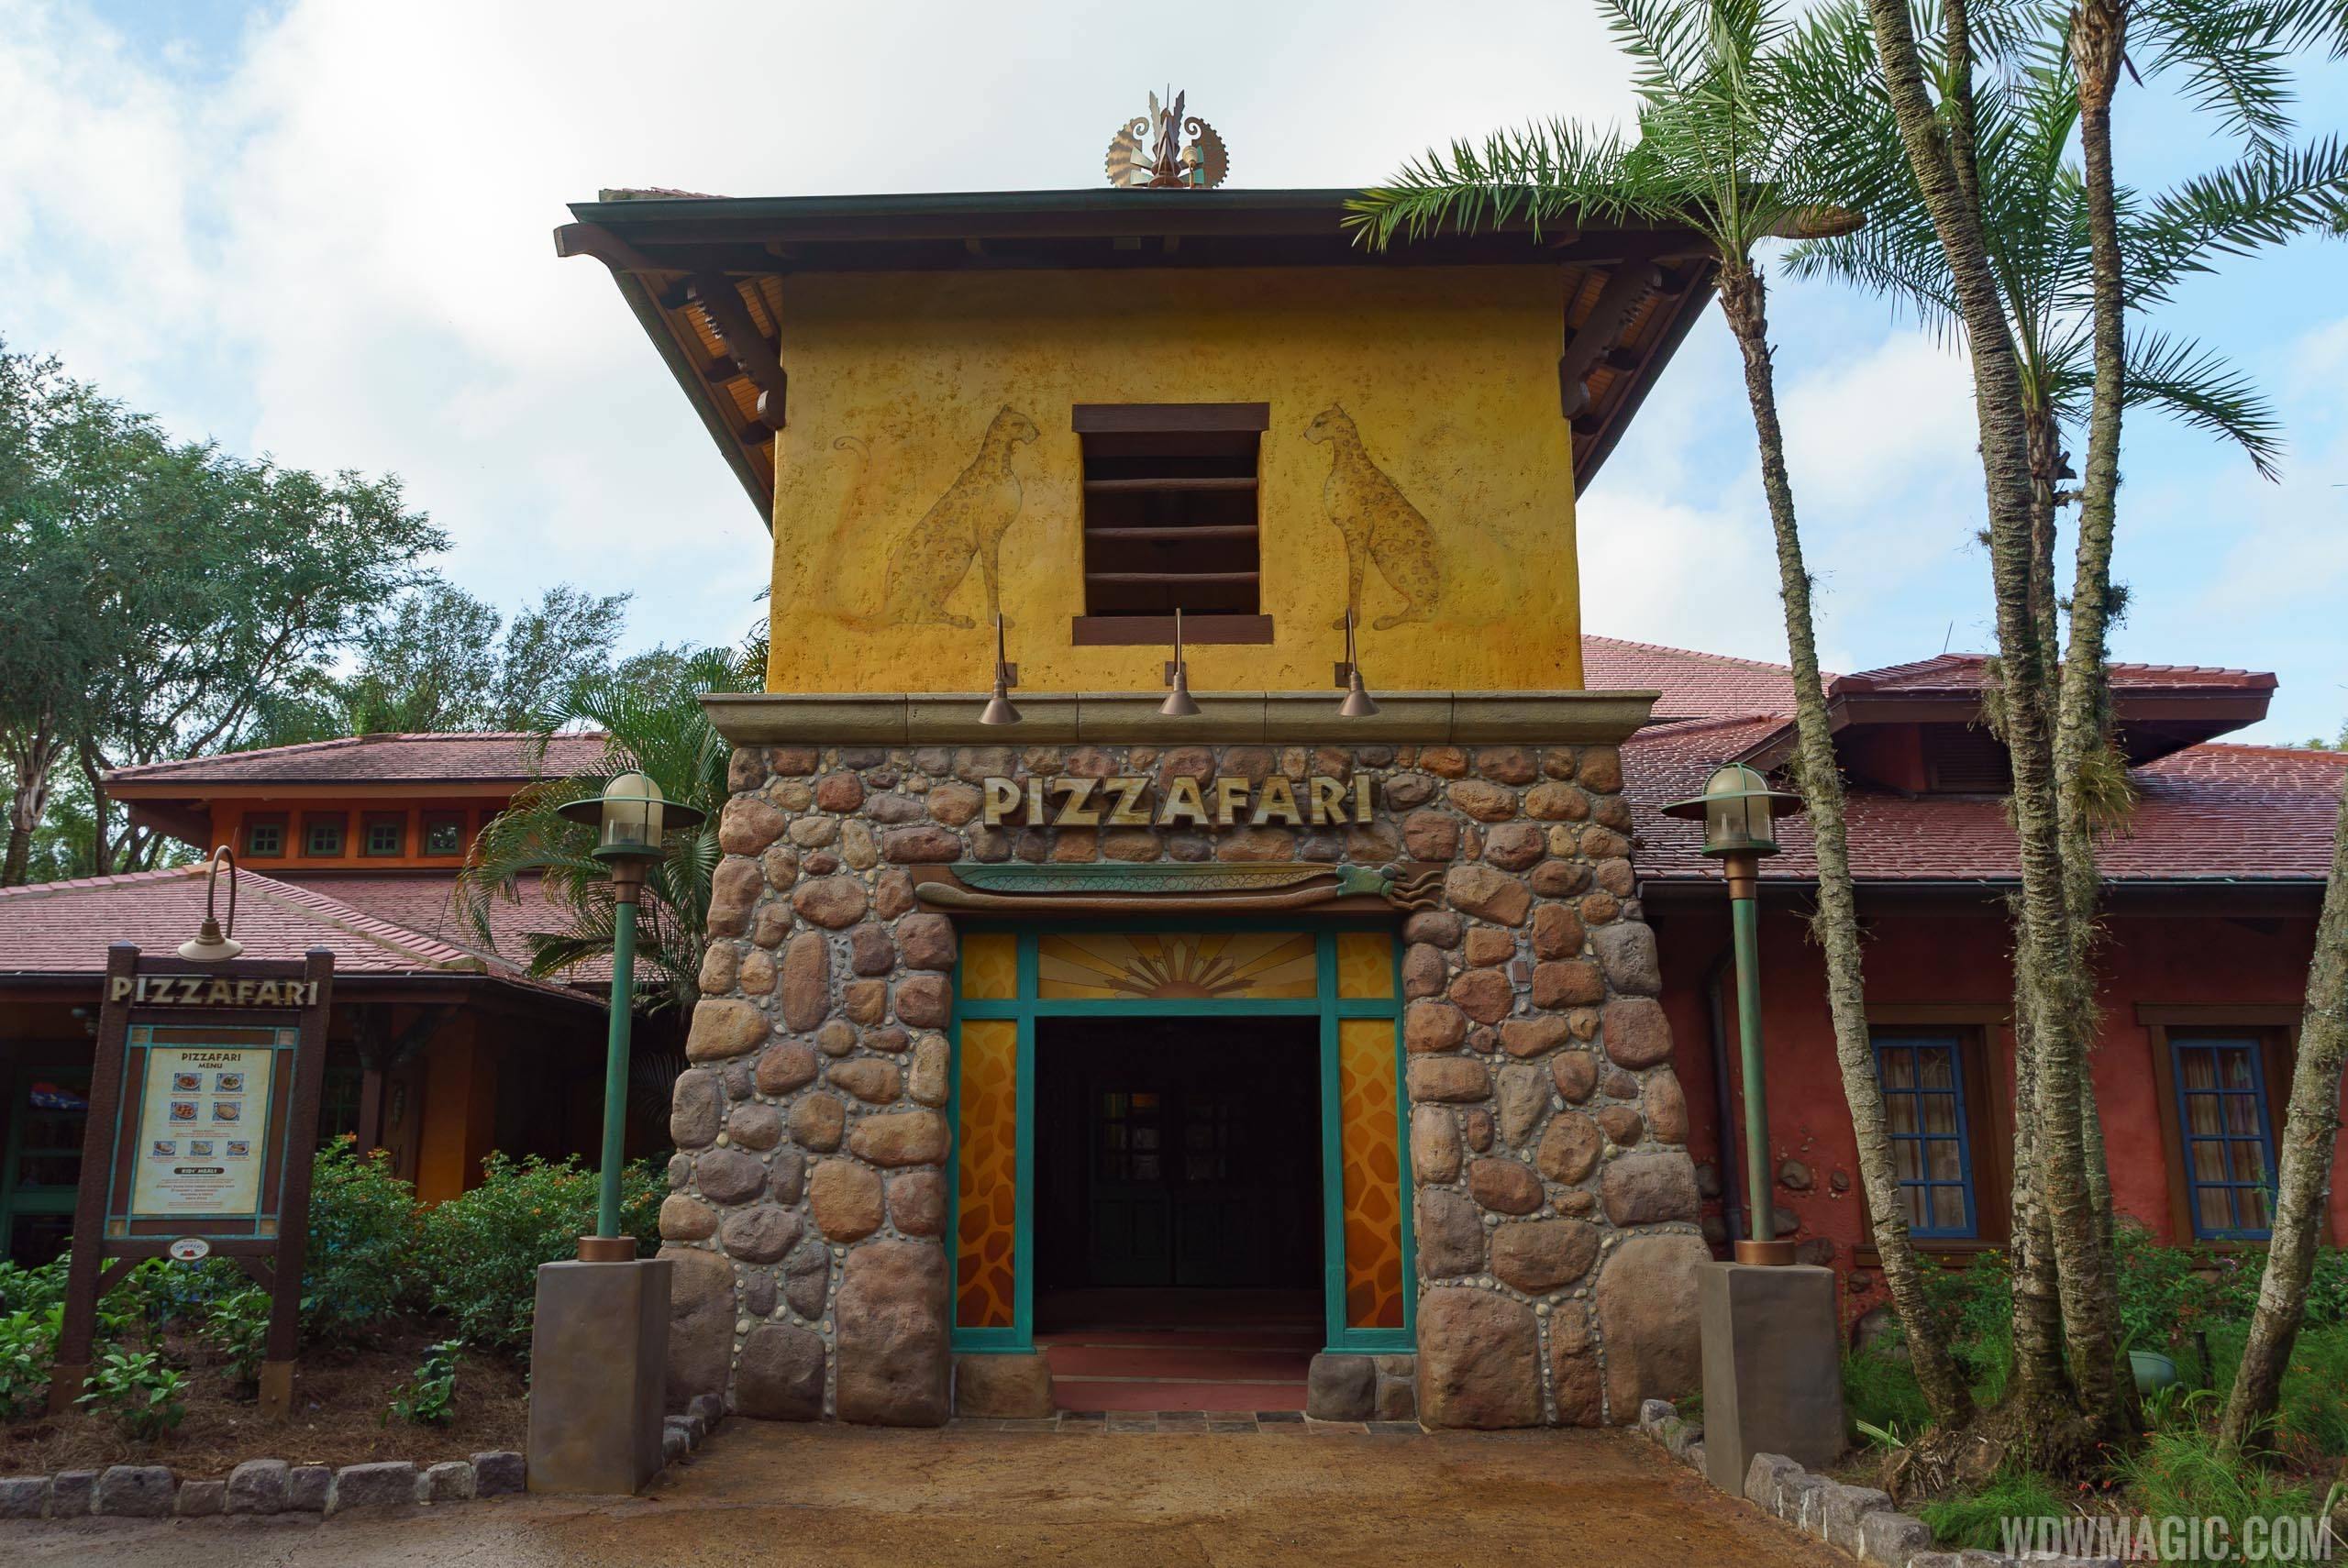 PHOTOS - Pizzafari reopens from refurbishment with new color scheme